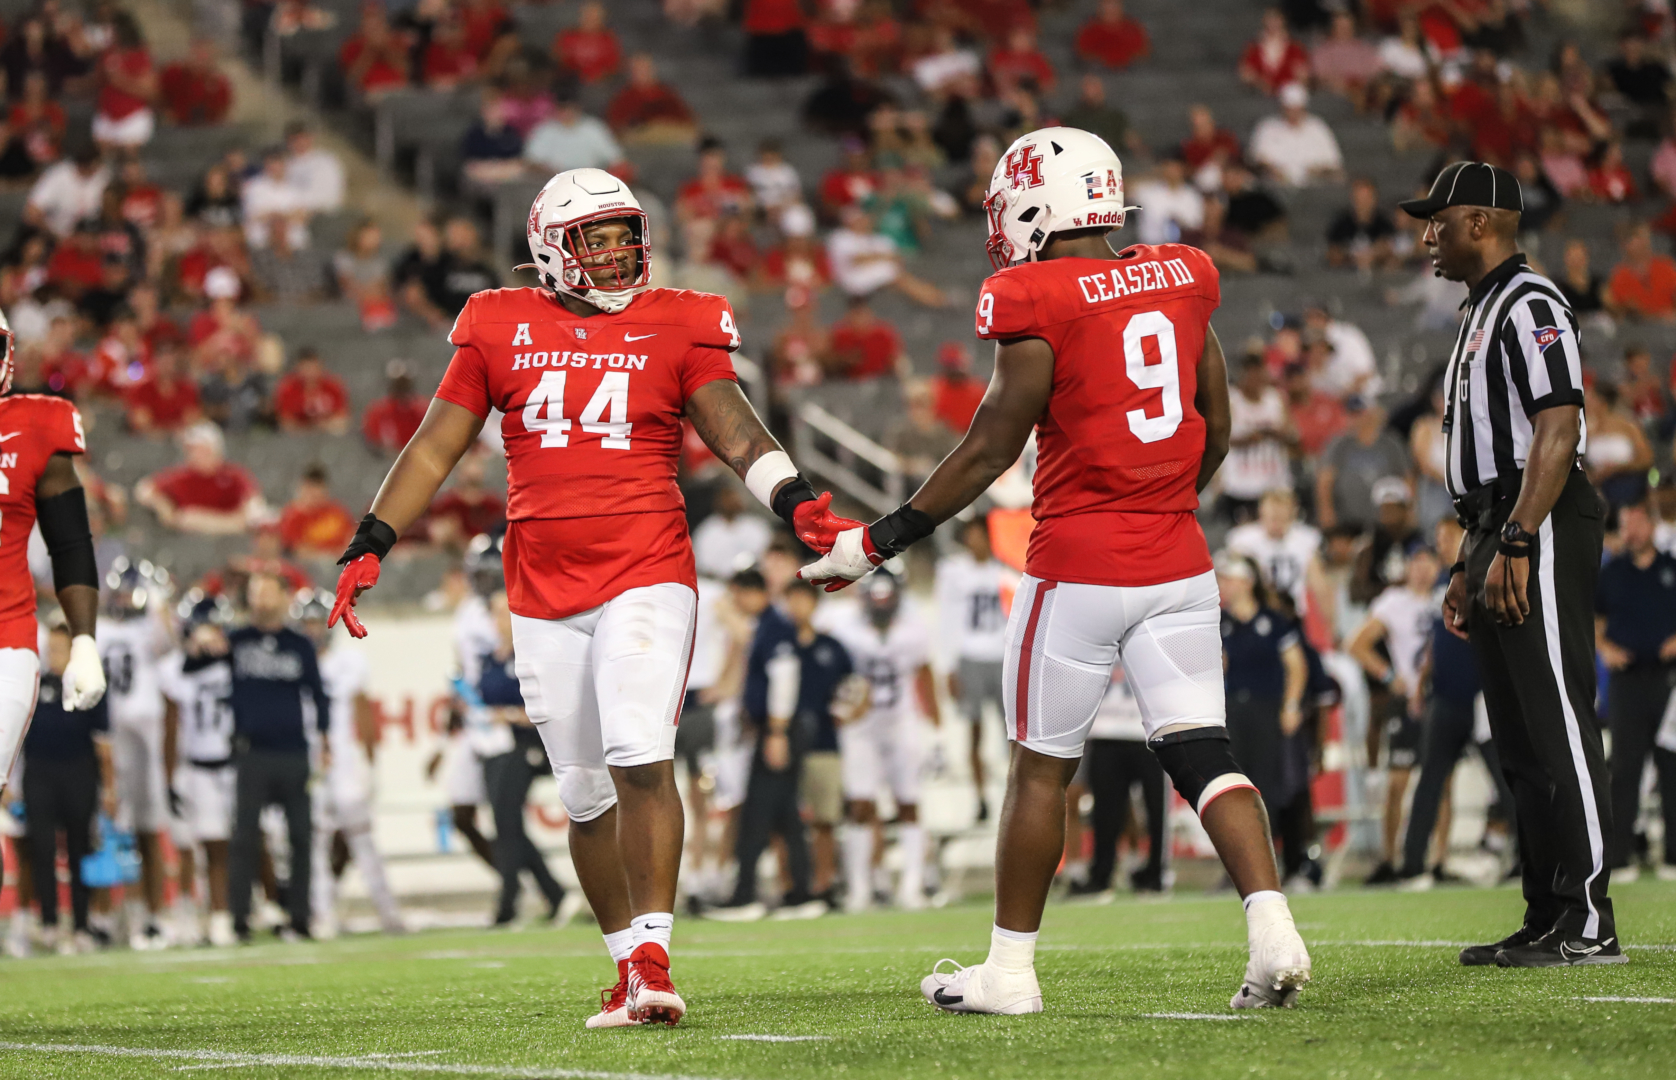 UH football defensive ends D'Anthony Jones and Nelson Ceaser were the heroes for the Cougars in the win over Rice last Saturday. | Sean Thomas/The Cougar